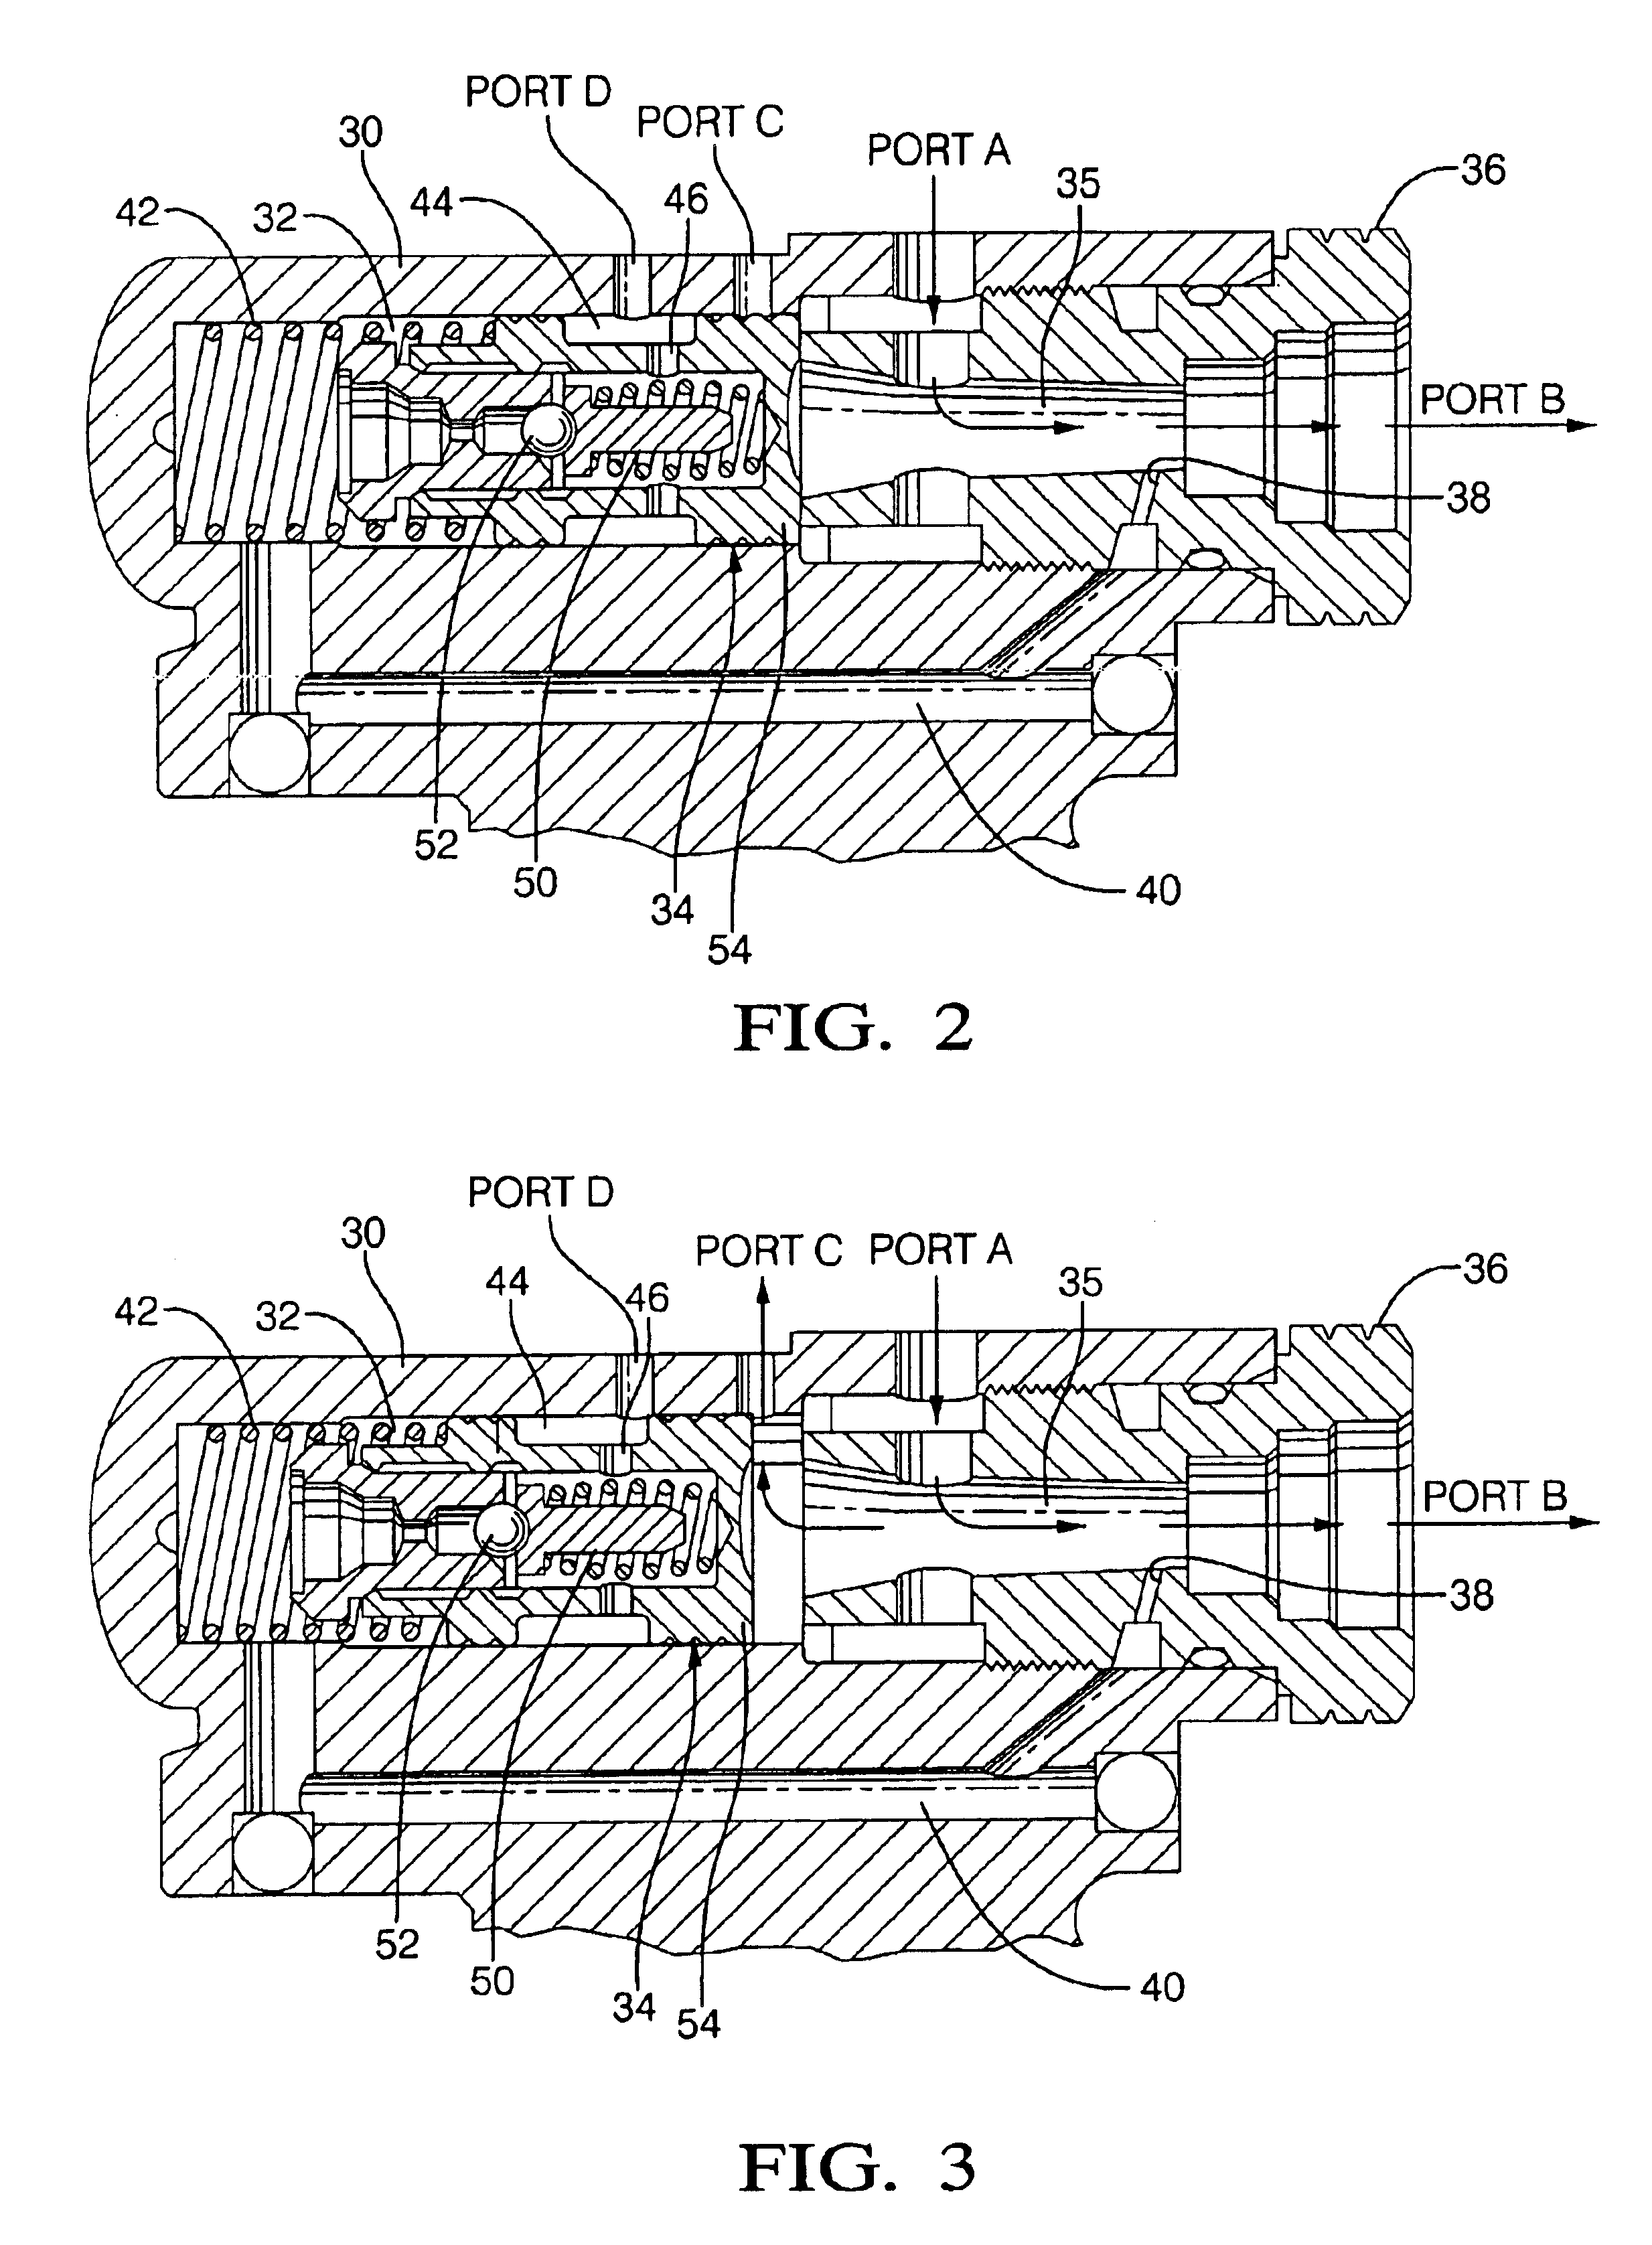 Hydraulic brake and steering assist system